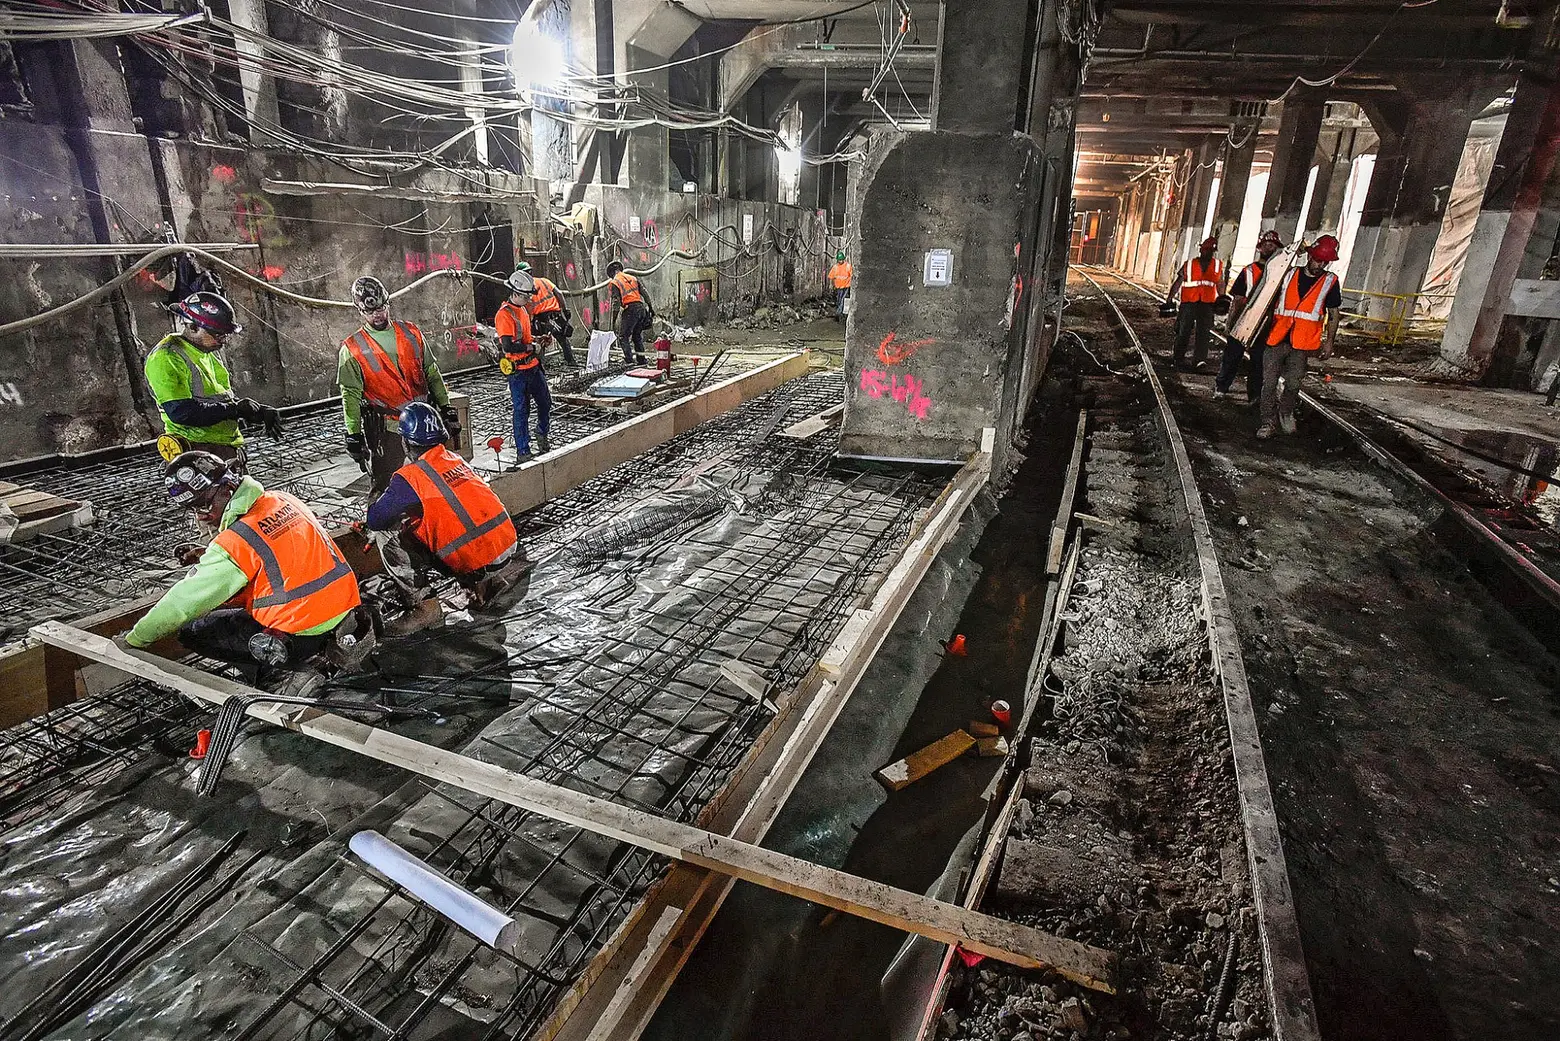 Cost of East Side Access project jumps again, now over $11B